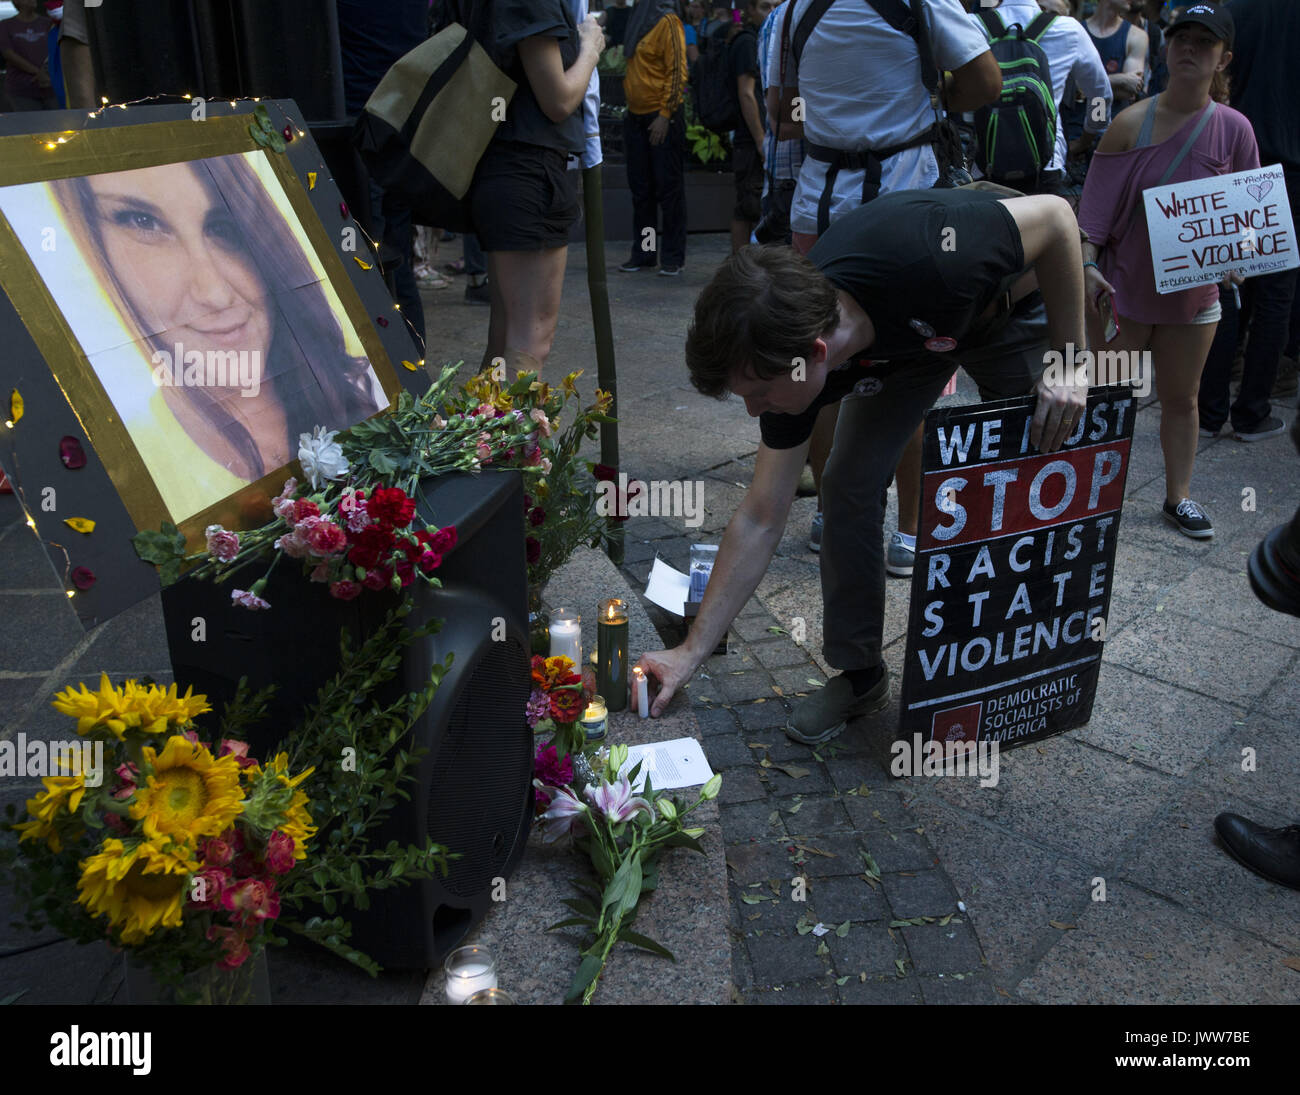 Atlanta, GA, USA. 13th Aug, 2017. Anti-Fascist protestors gather in downtown Atlanta and march along Peachtree Street, showing their support of those who demonstrated against white supremacist group in Charlottesville, VA. Rally organized by Antifa, an organization nationally that fights fascism.Pictured: Portrait of Charlottesville victim Heather Heyer at impromptu memorial Credit: Robin Rayne Nelson/ZUMA Wire/Alamy Live News Stock Photo